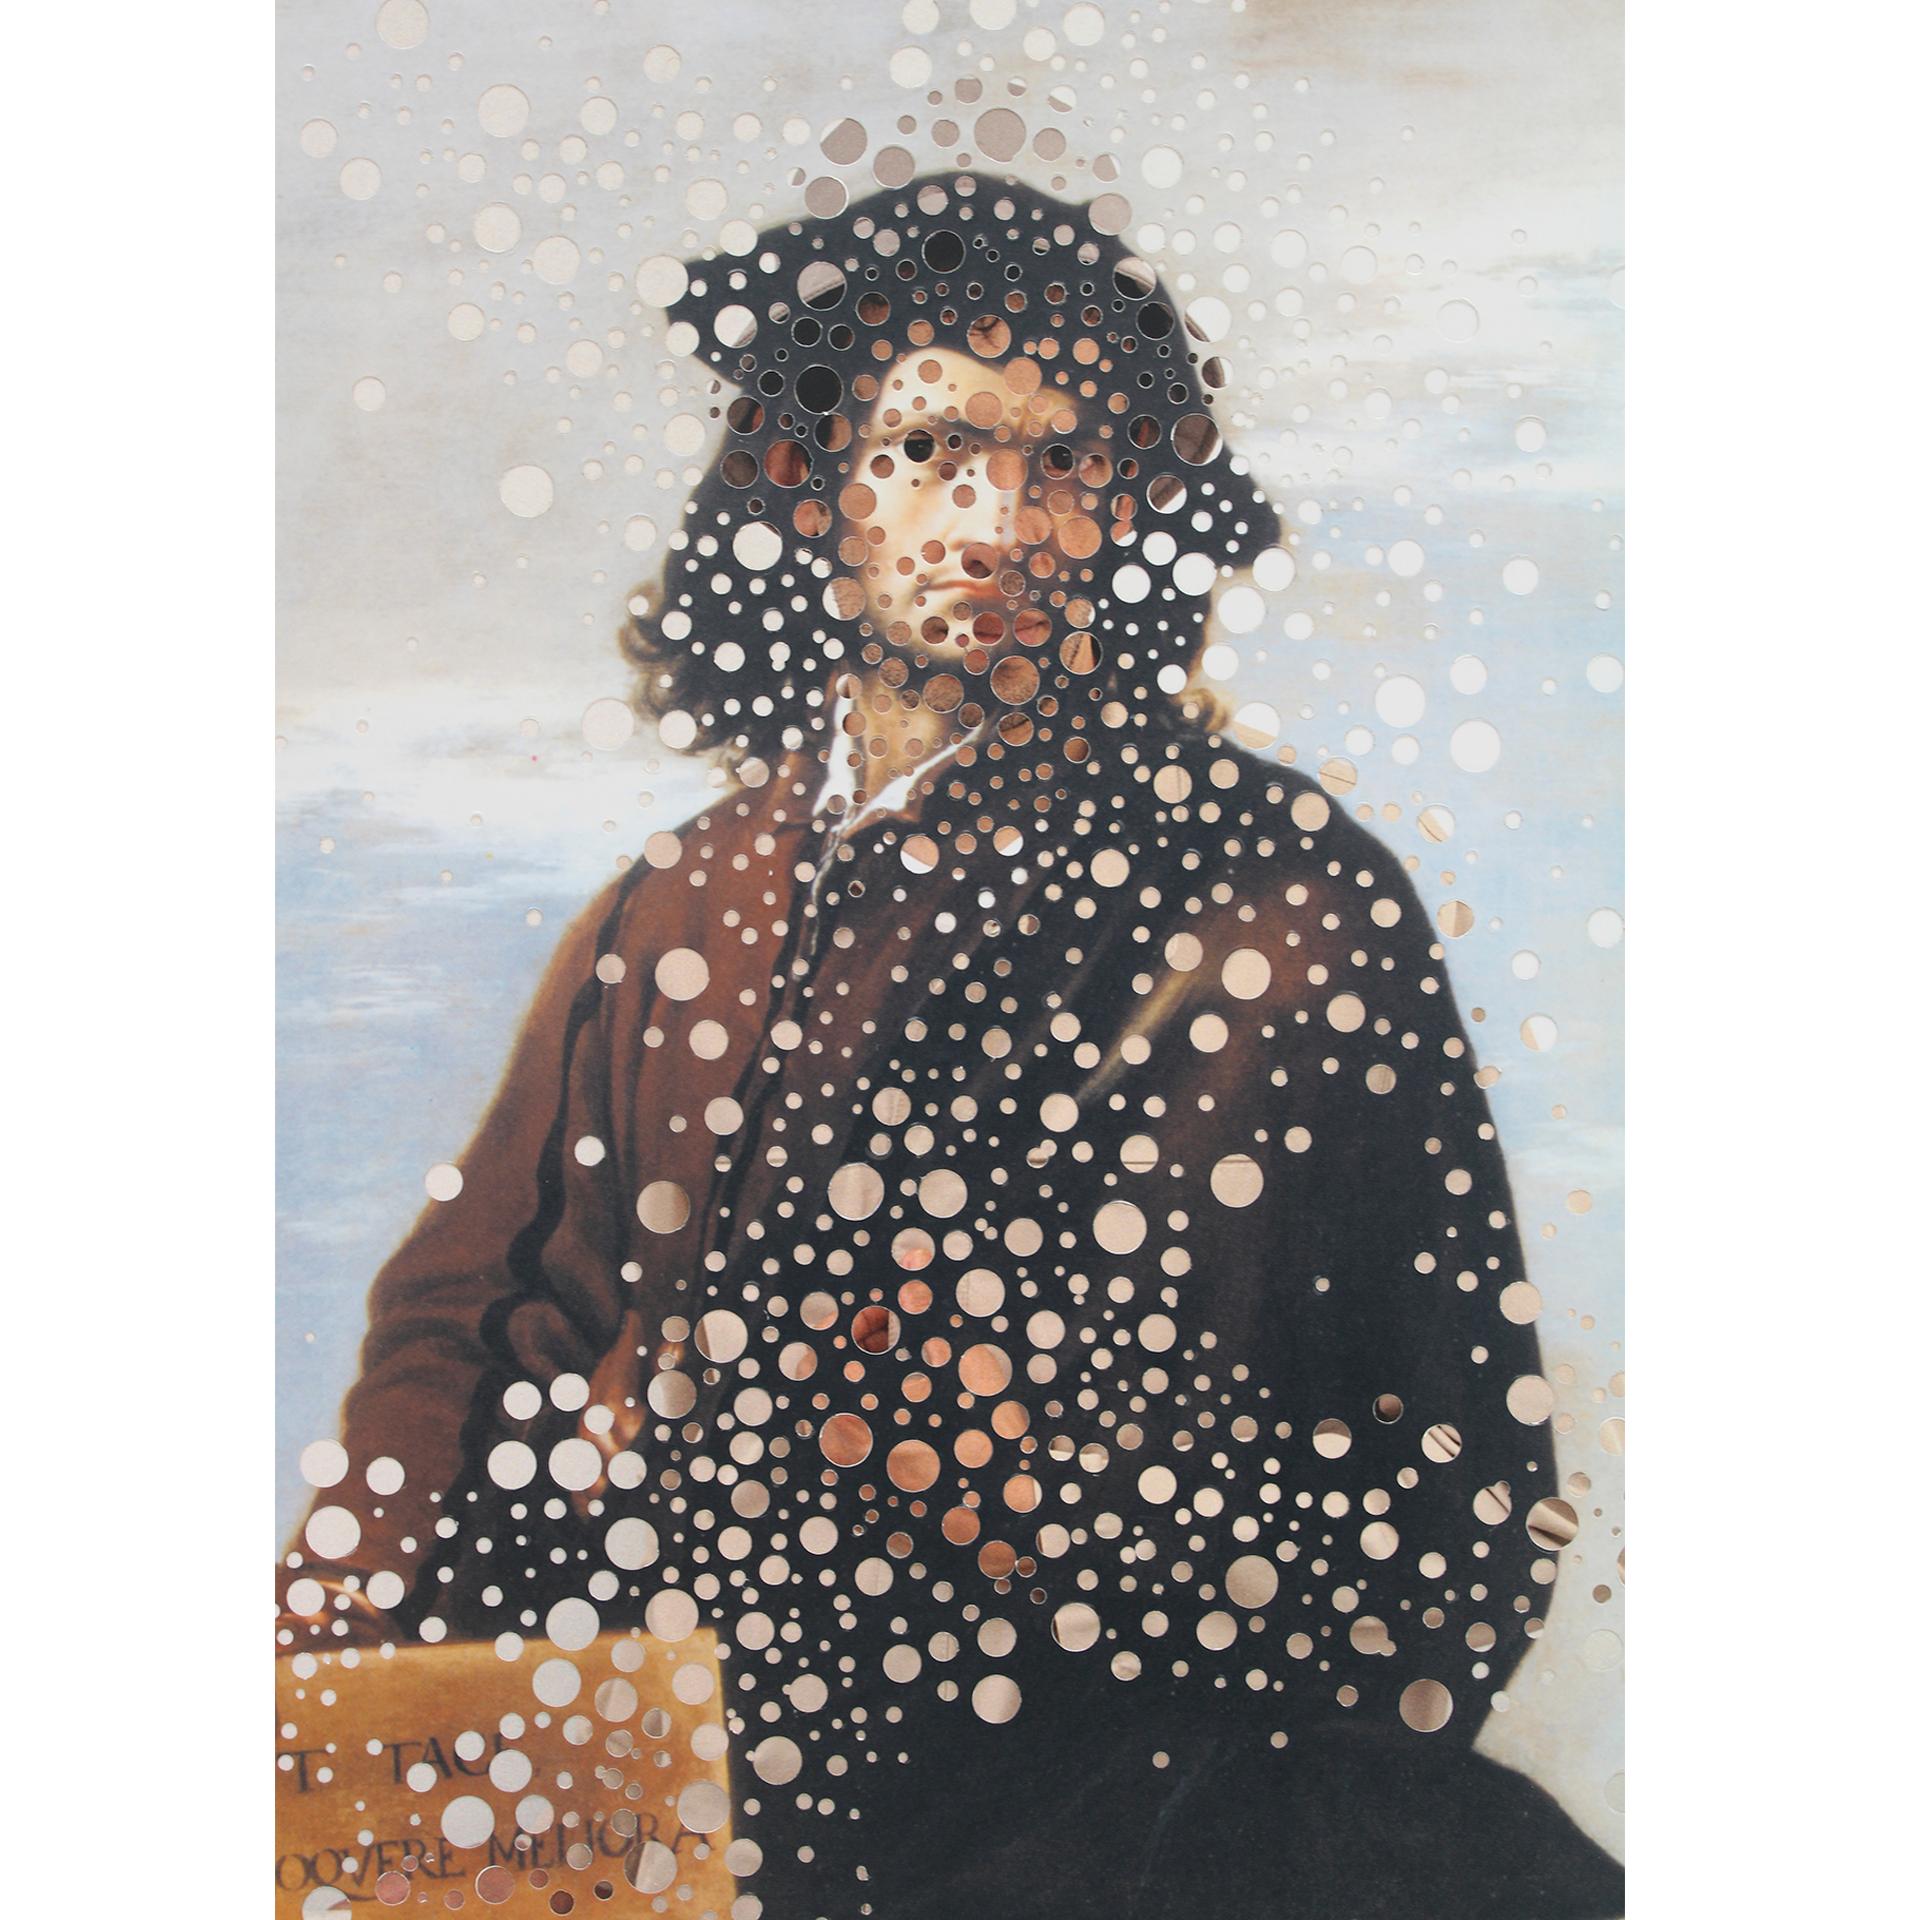 Alfonso Albano, Self-portrait with Salvator Rosa. Ed 1/3, 2002. Perforated RC paper.

São Paulo, Brasil, 1964.

In his photographs, installations, projections and objects, Albano Afonso explores light, the intangible element that makes vision of the